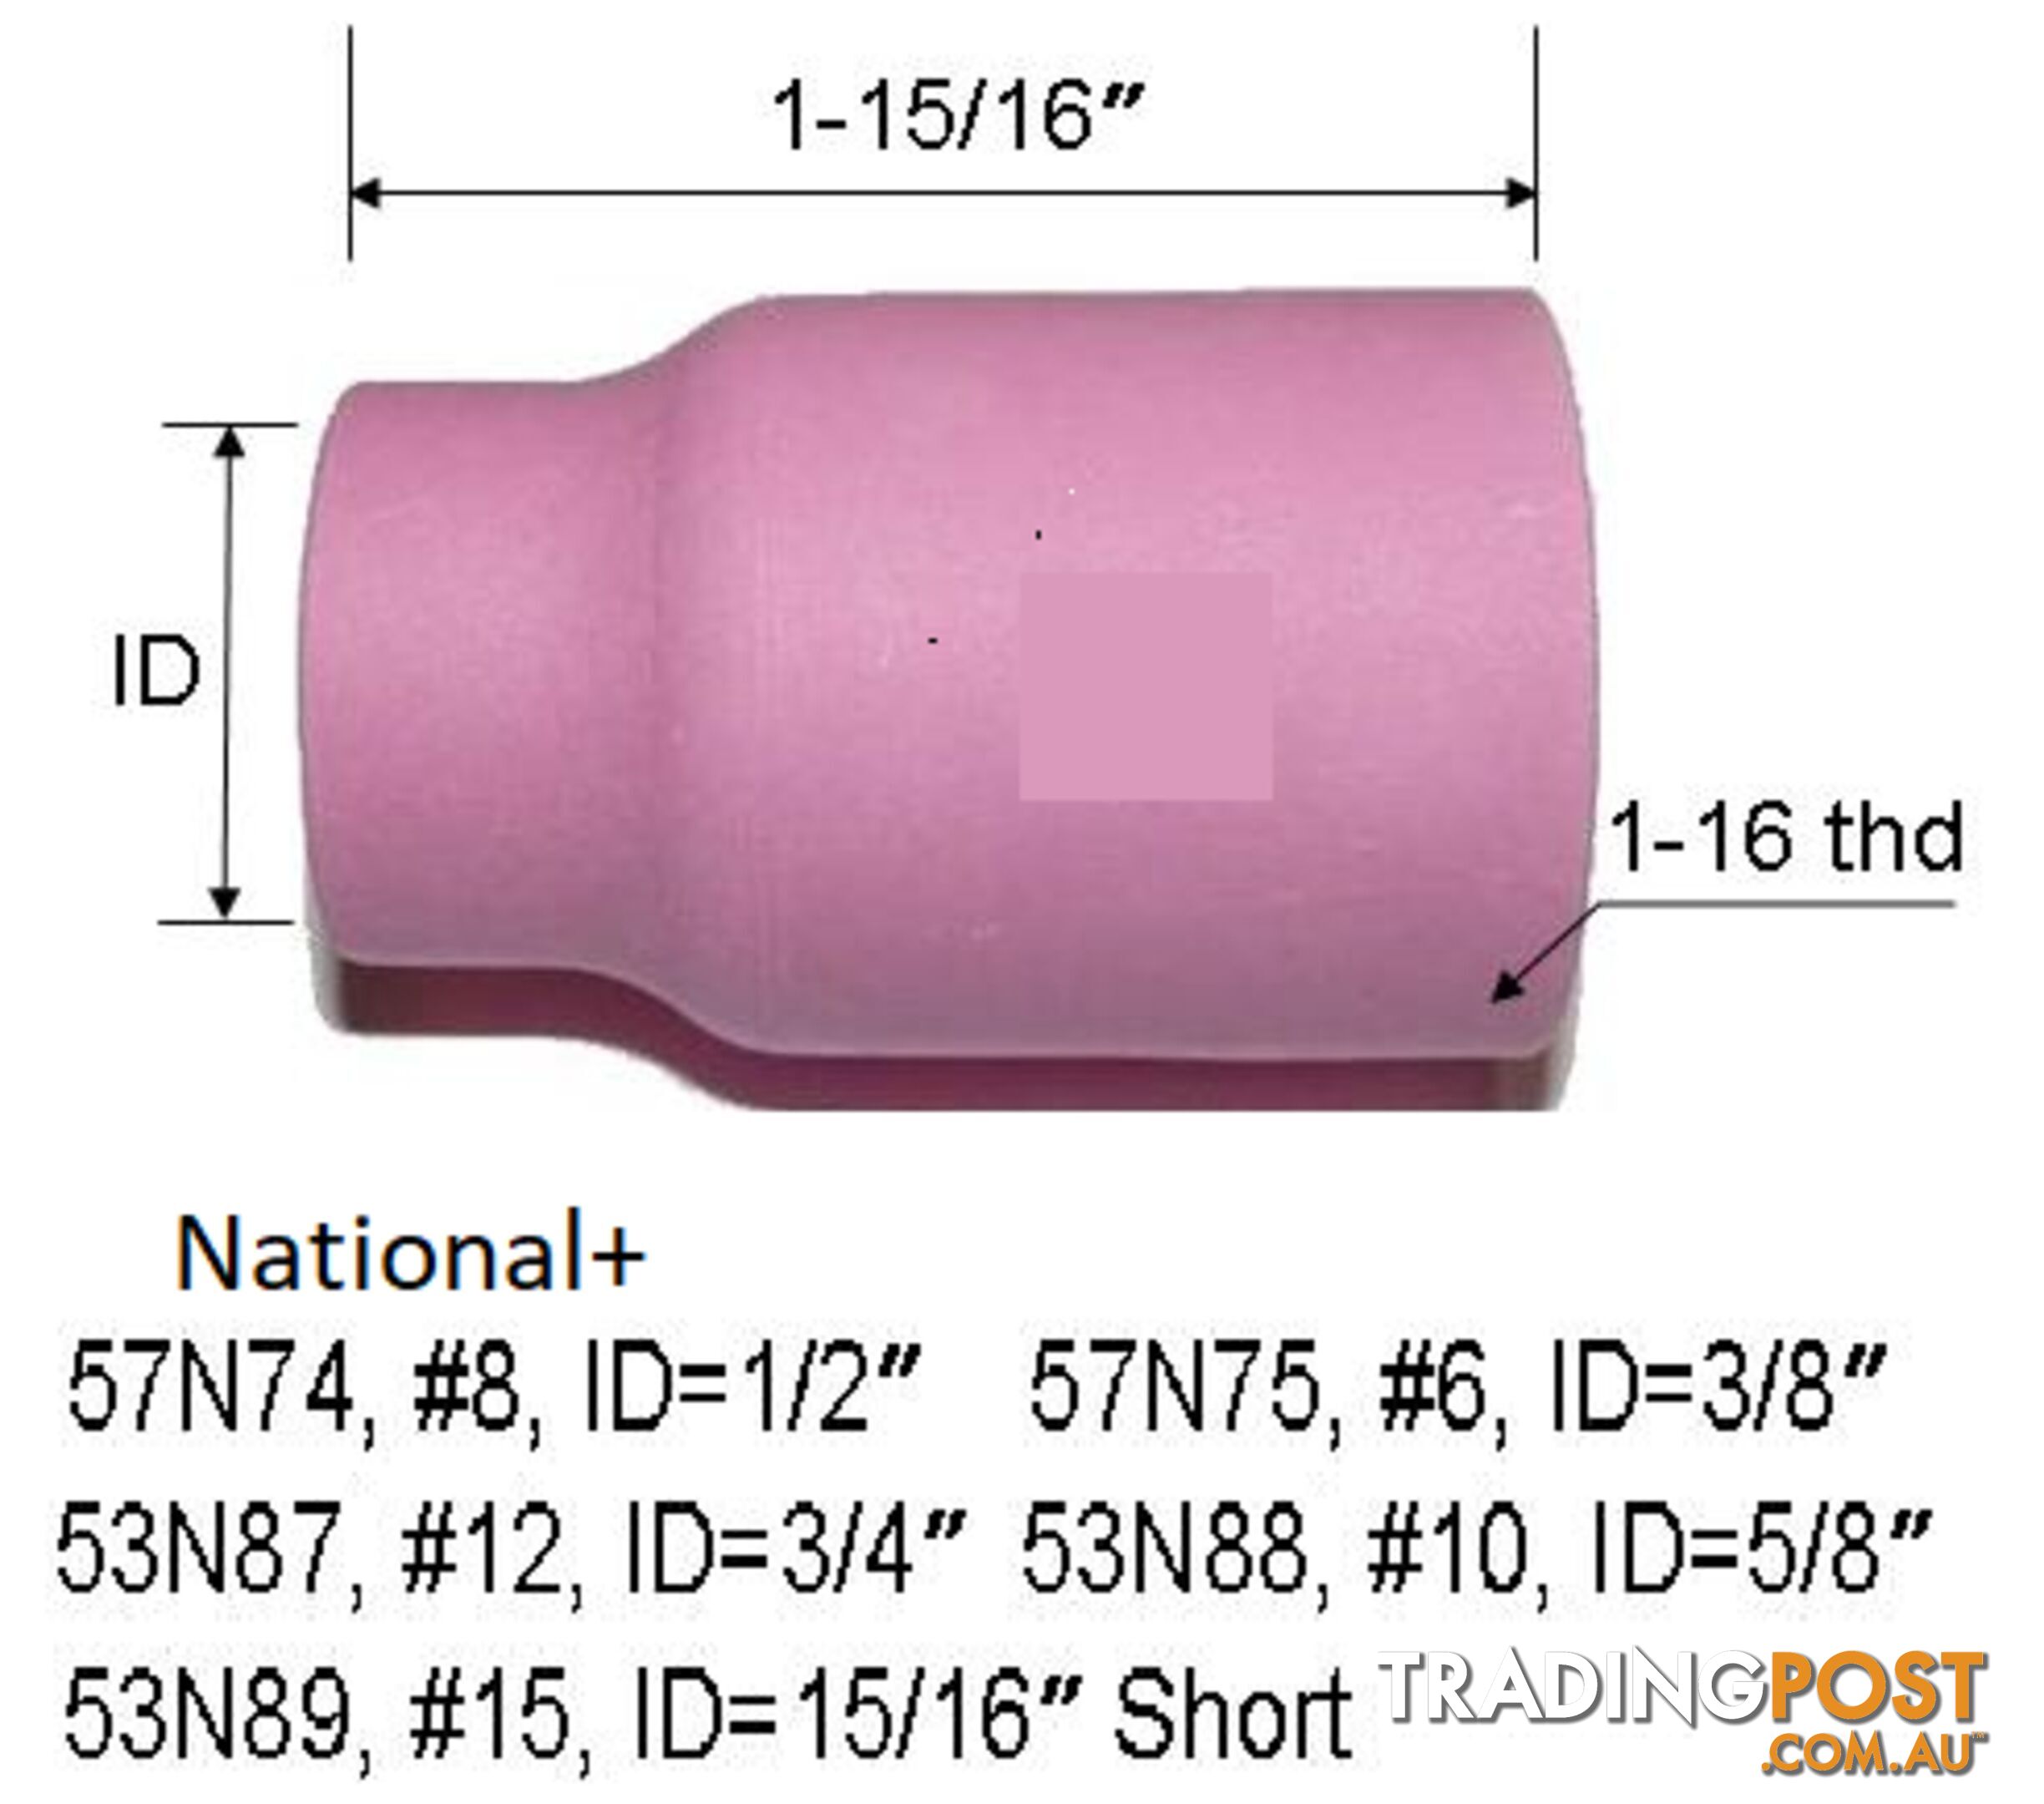 Large Diameter Alumina Nozzles For Gas Lens Size 12 (3/4") Suits 17/18/26 Torch 53N87 Pkt : 2